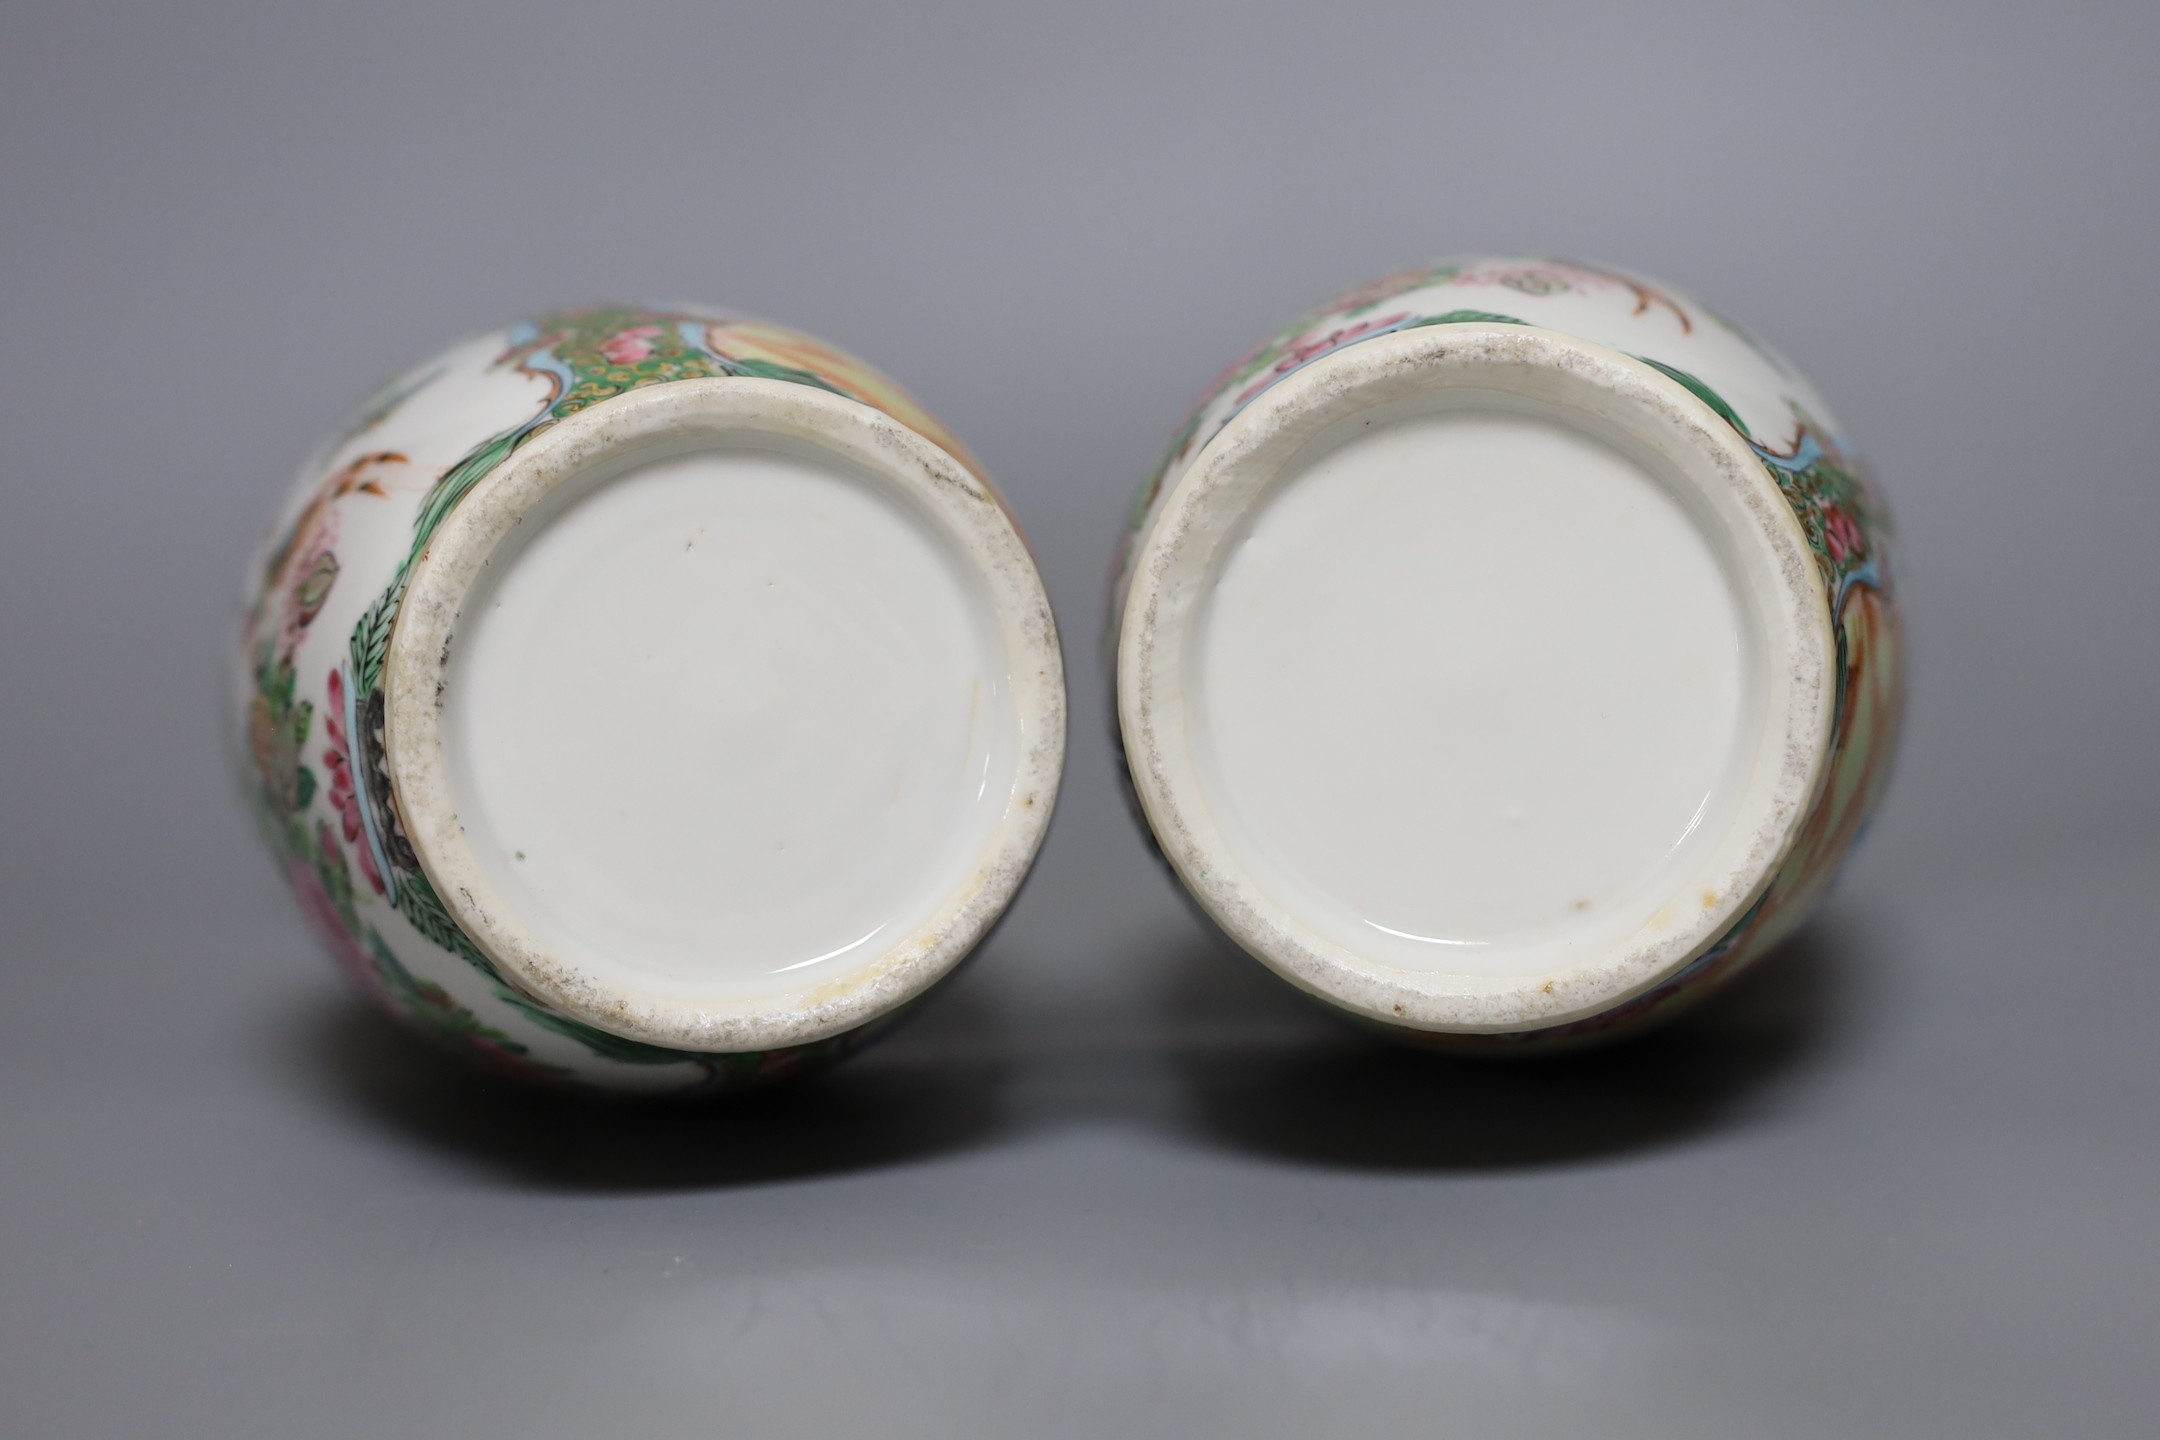 A pair of 19th century Chinese Canton ceramic vases, 25.5cm tall